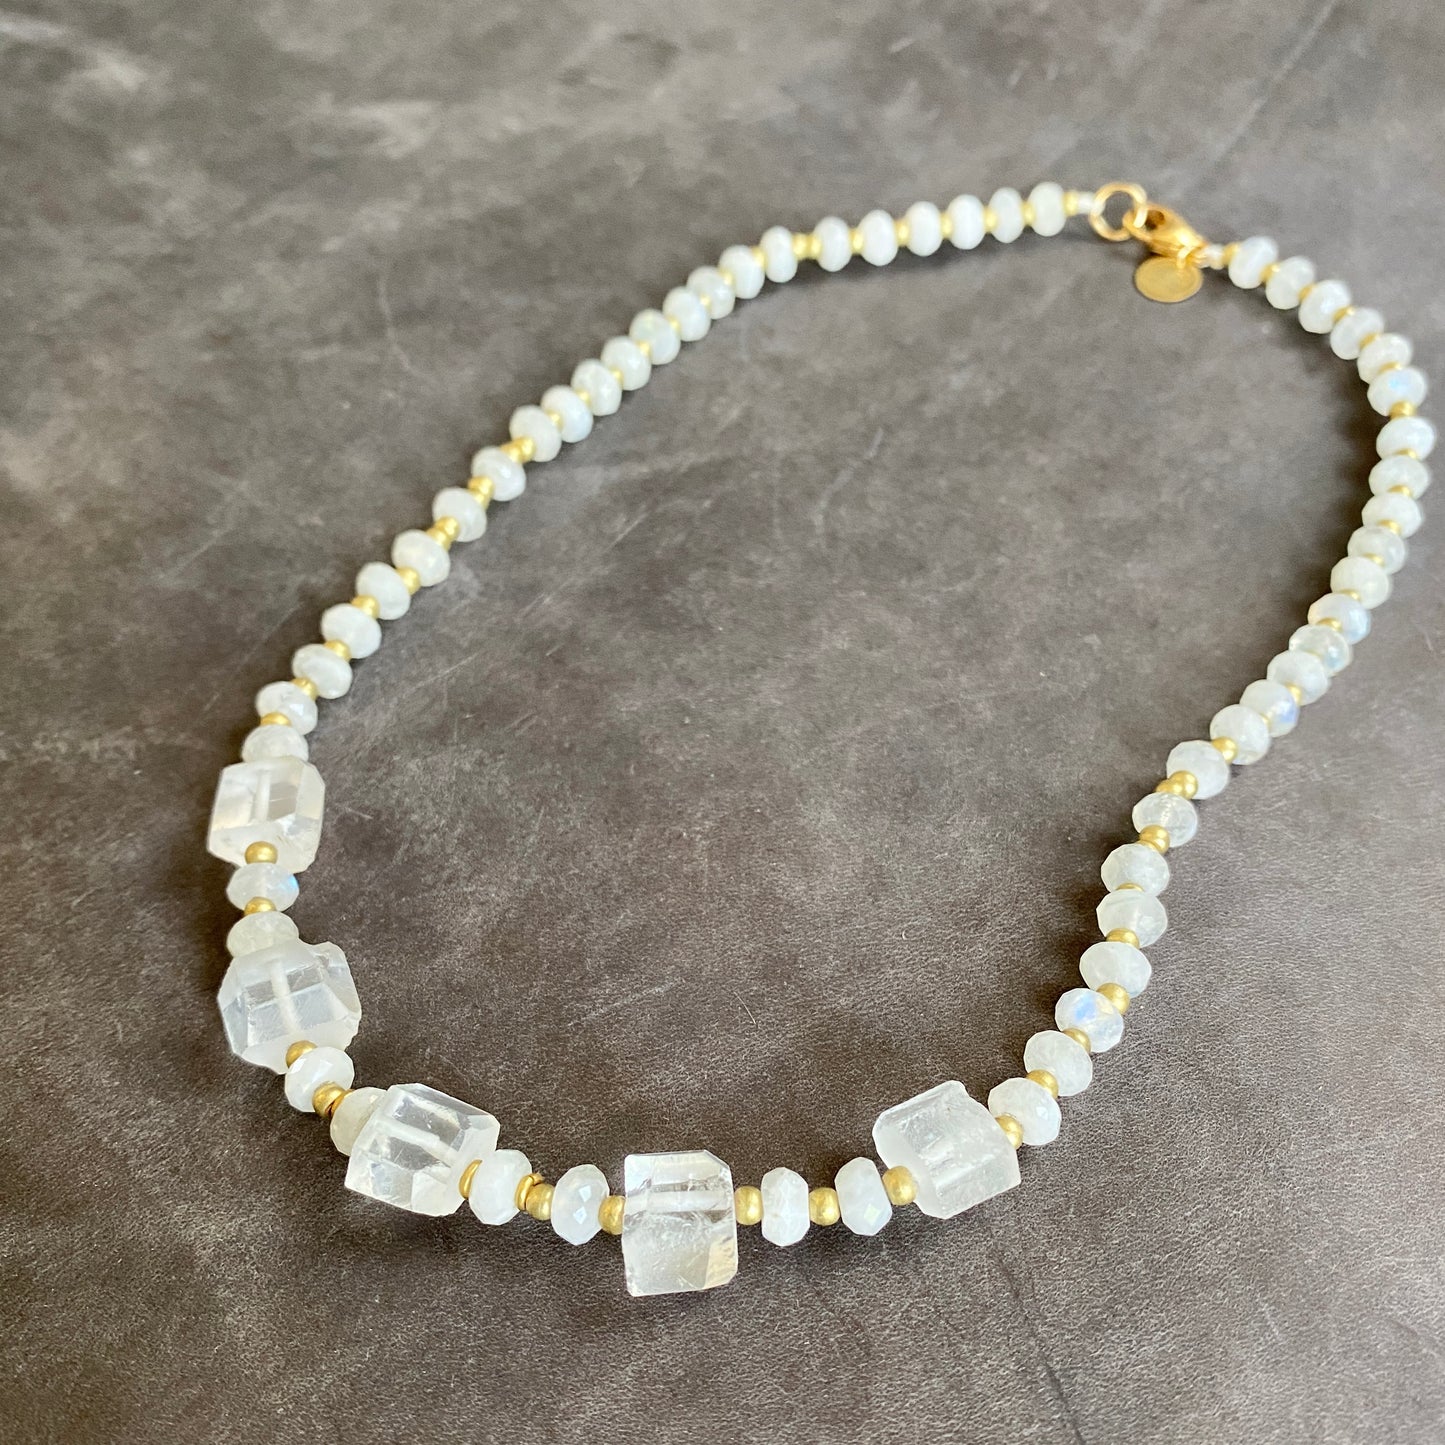 Moonstone, clear quartz gemstone necklace with African brass beads. 14k gold filled clasp. 20" necklace.